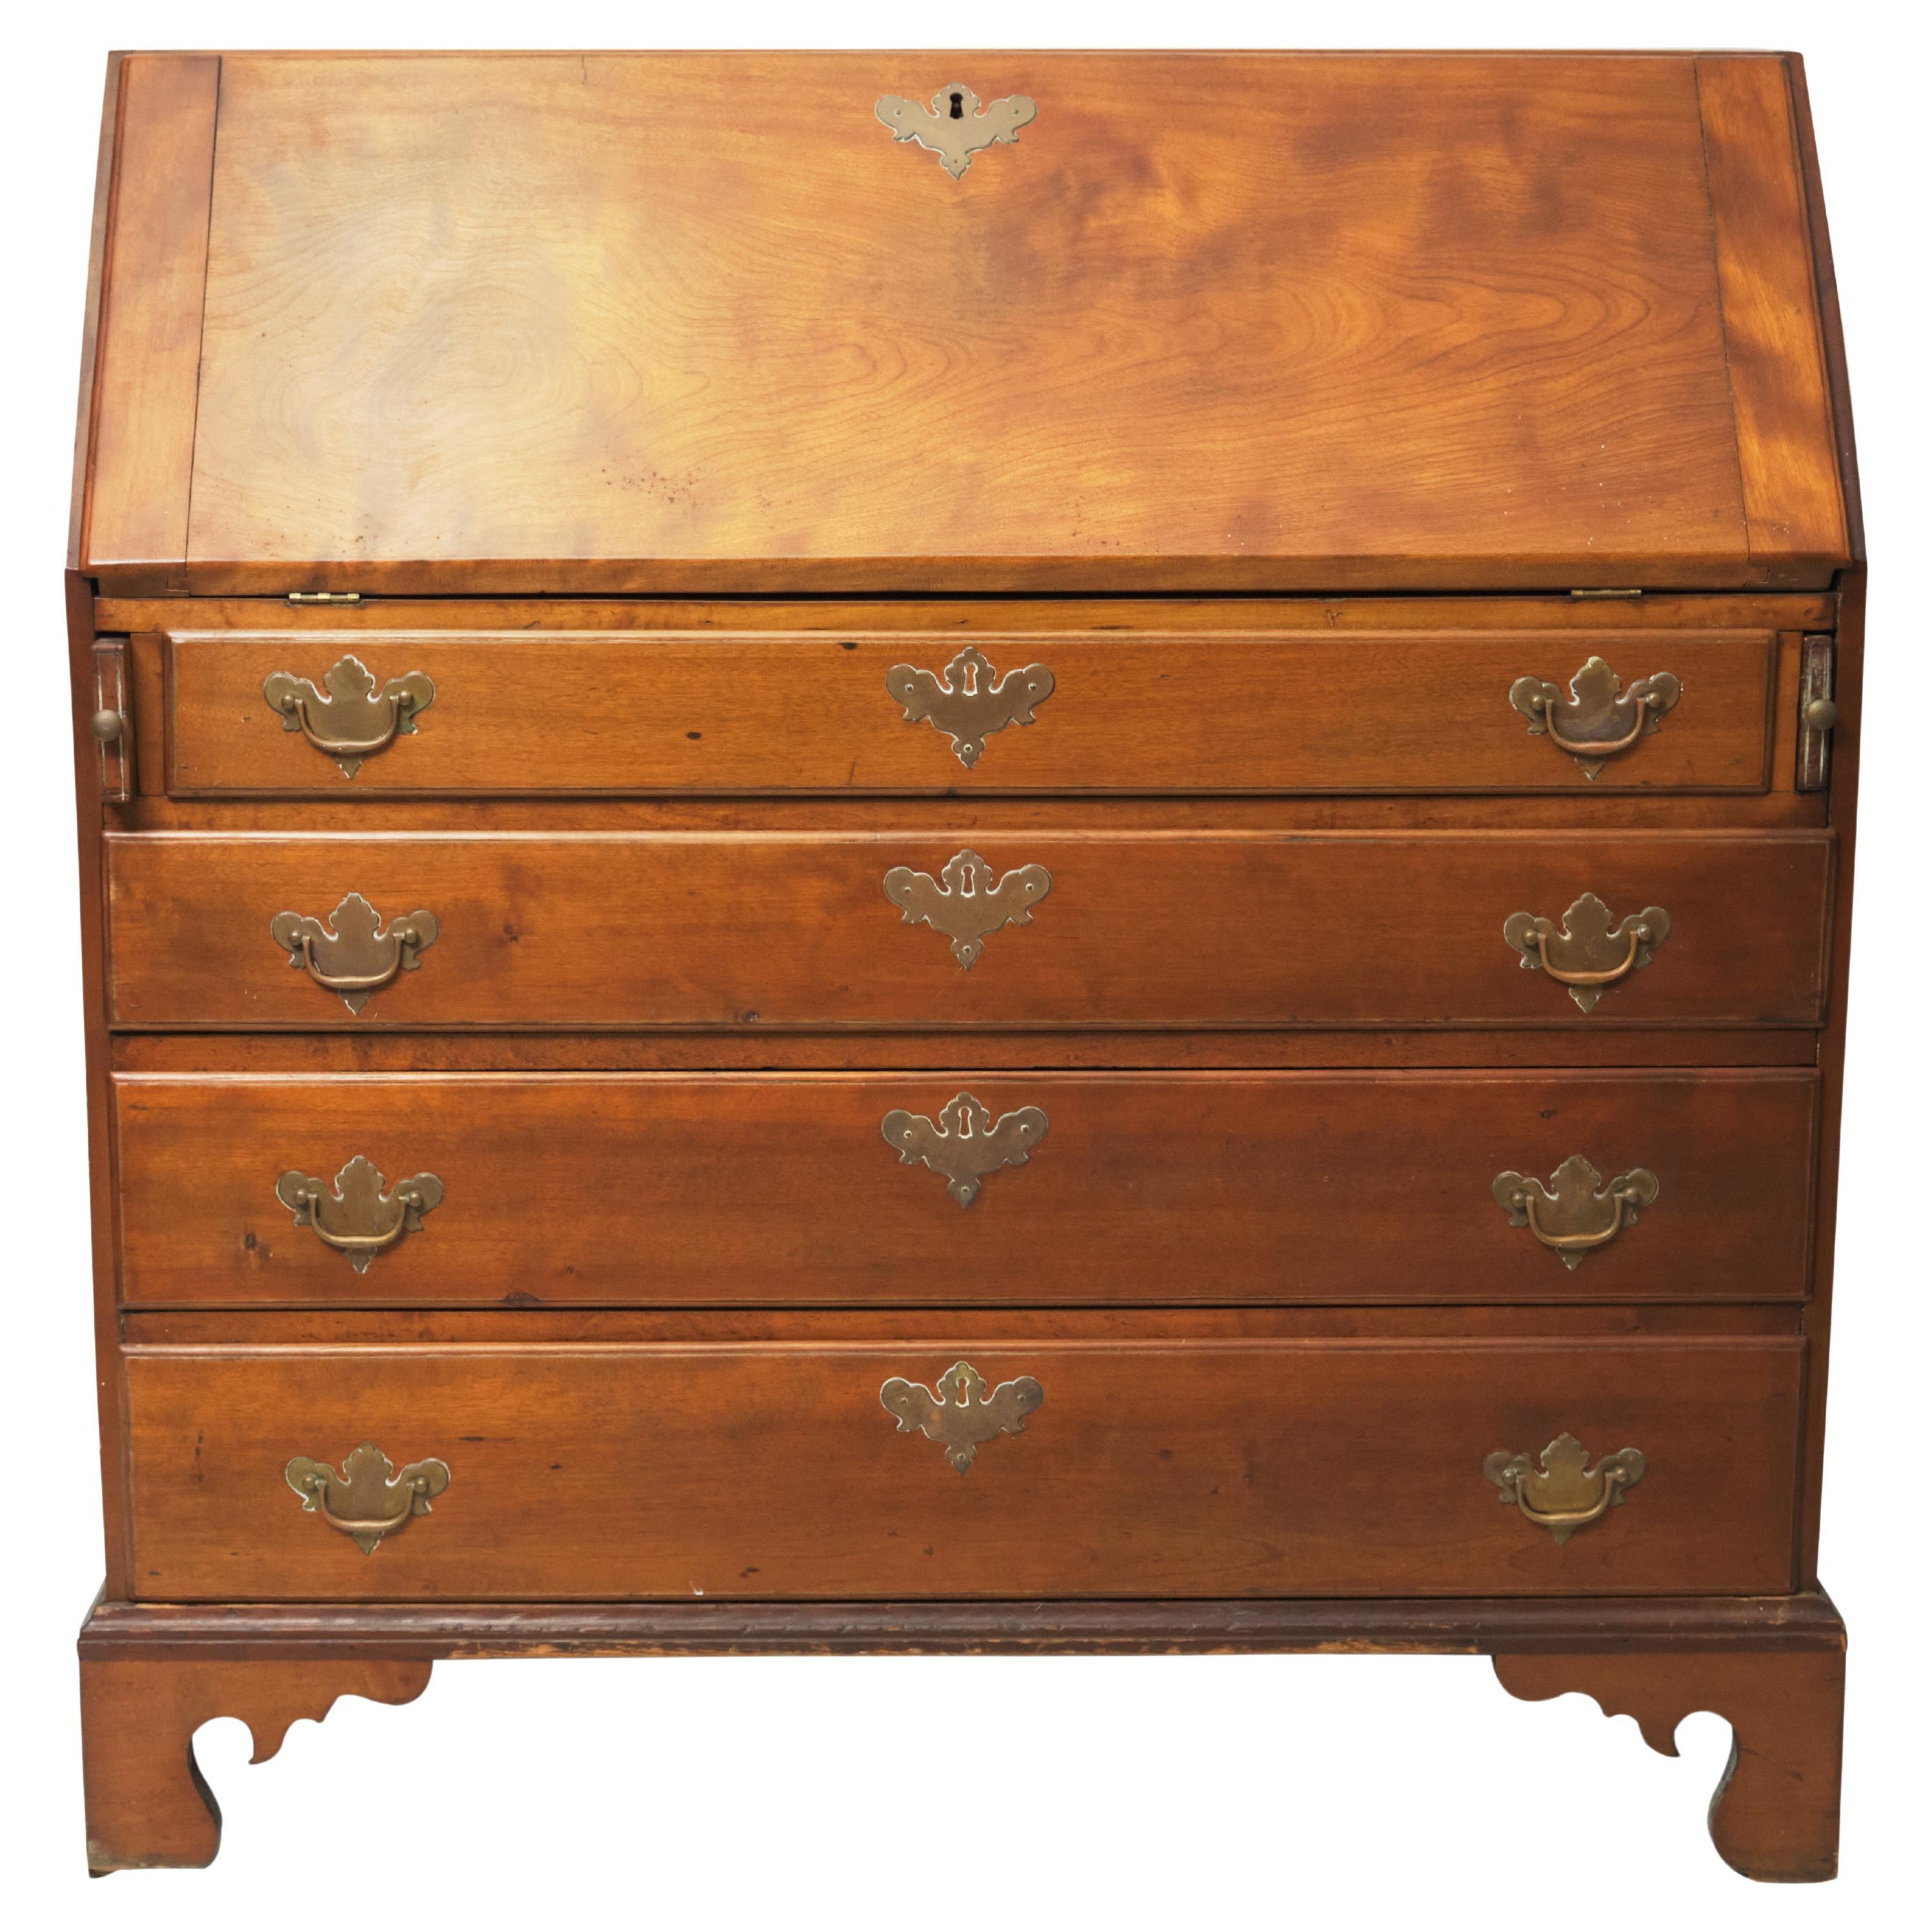 American Chippendale Maple Slant-Front Desk, Late 18th or Early 19th Century For Sale